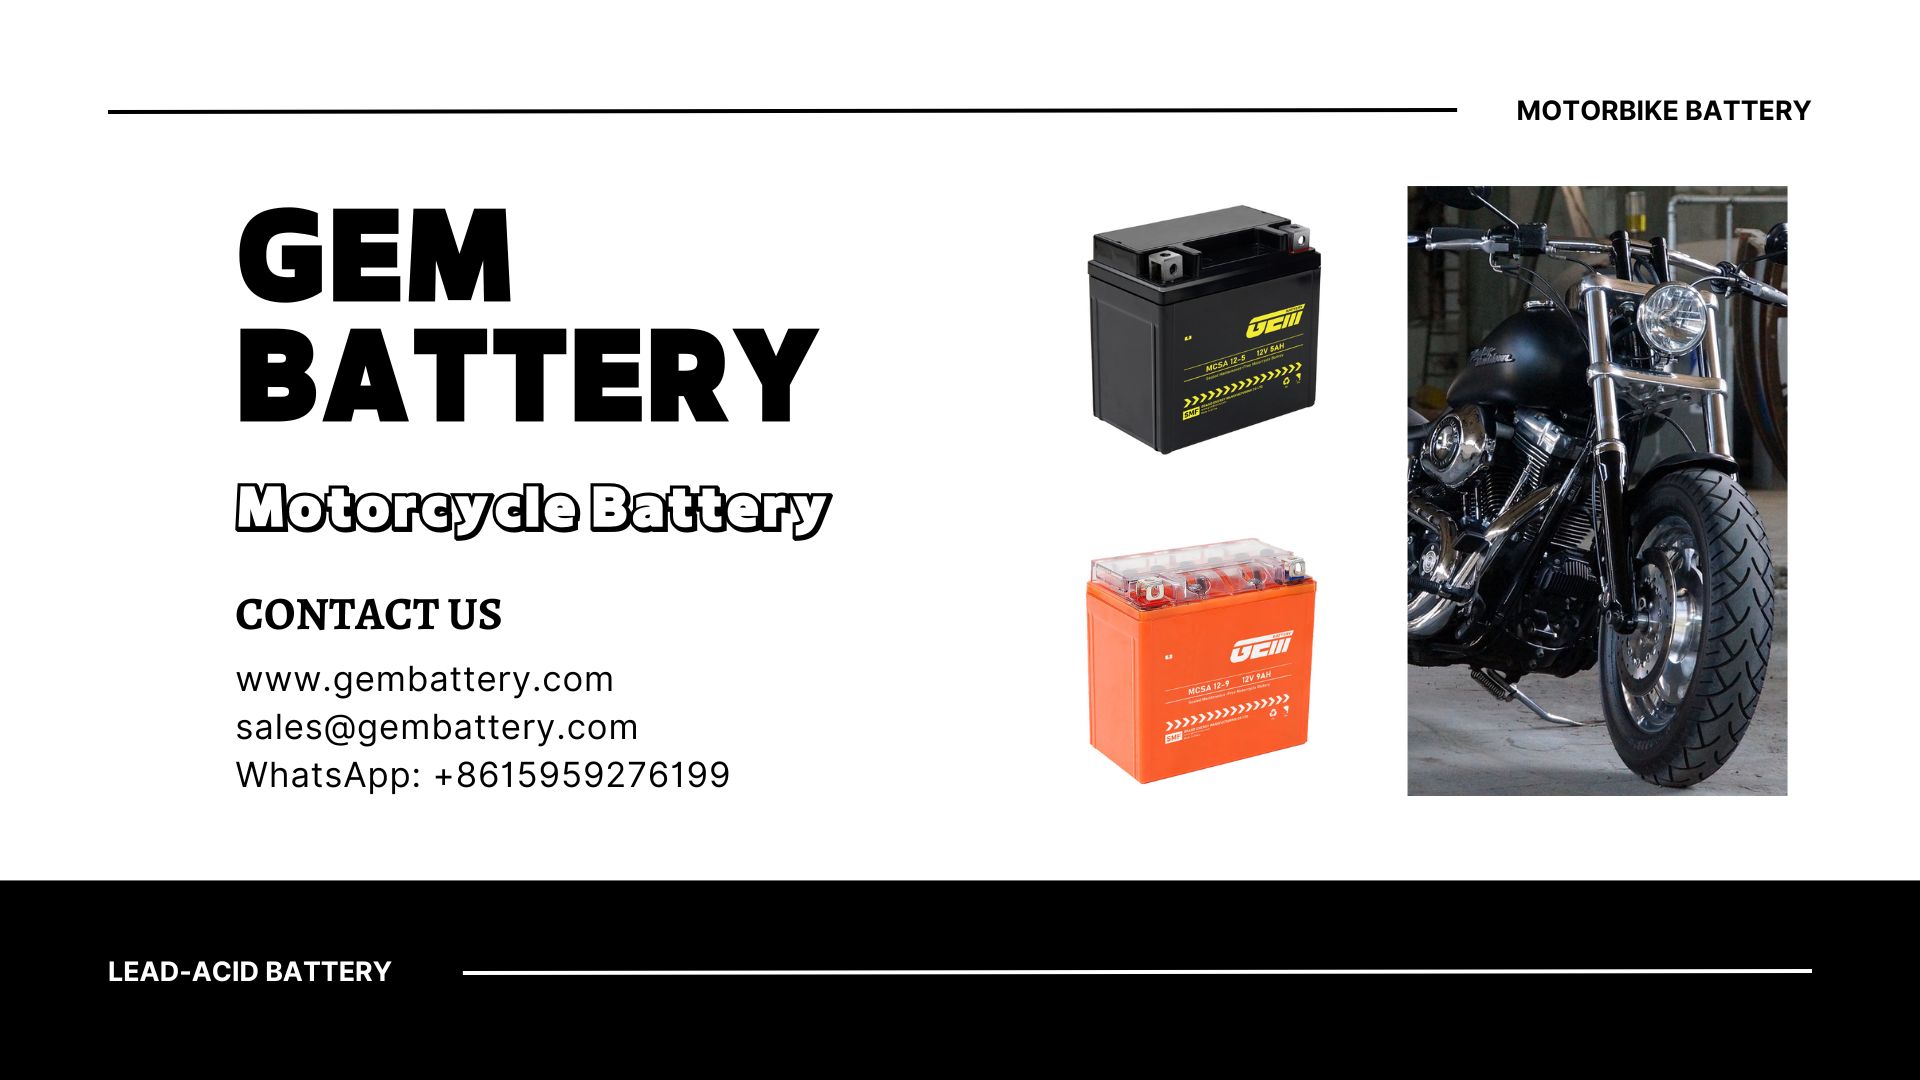 High performance motorcycle battery